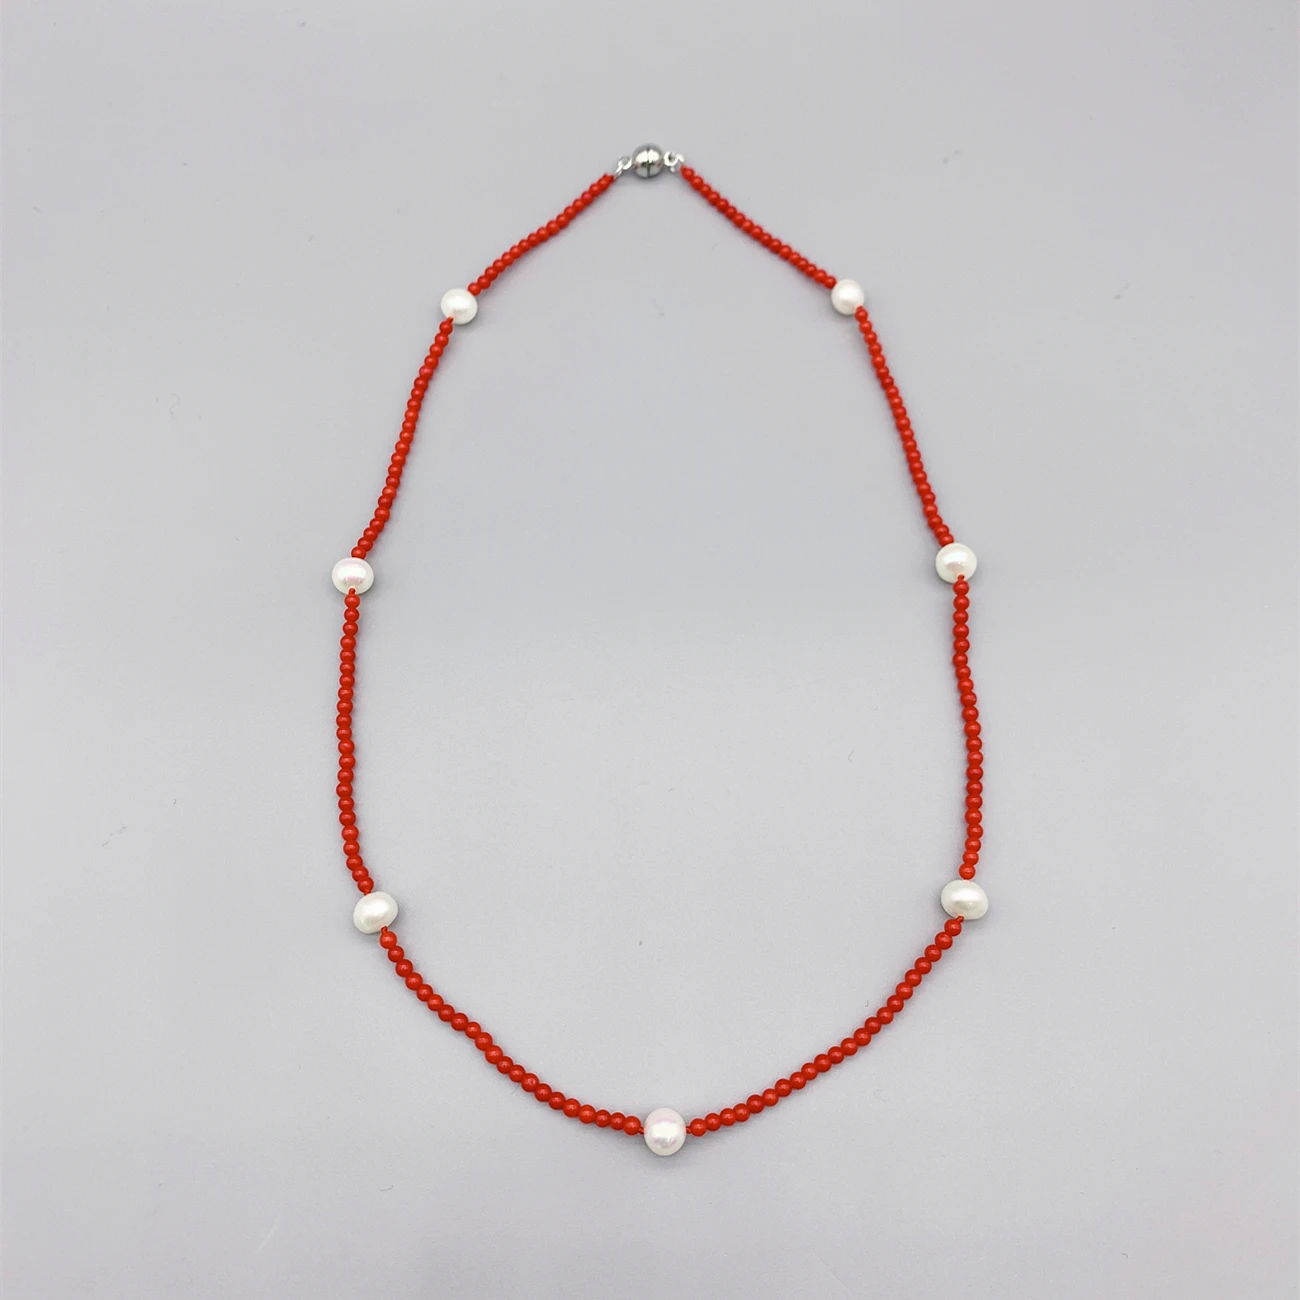 

FoLisaUnique 7-8mm White Freshwater Pearls 2mm Red Coral Necklace For Women Girls Birthday Gift Delicate Classic Choker Necklace